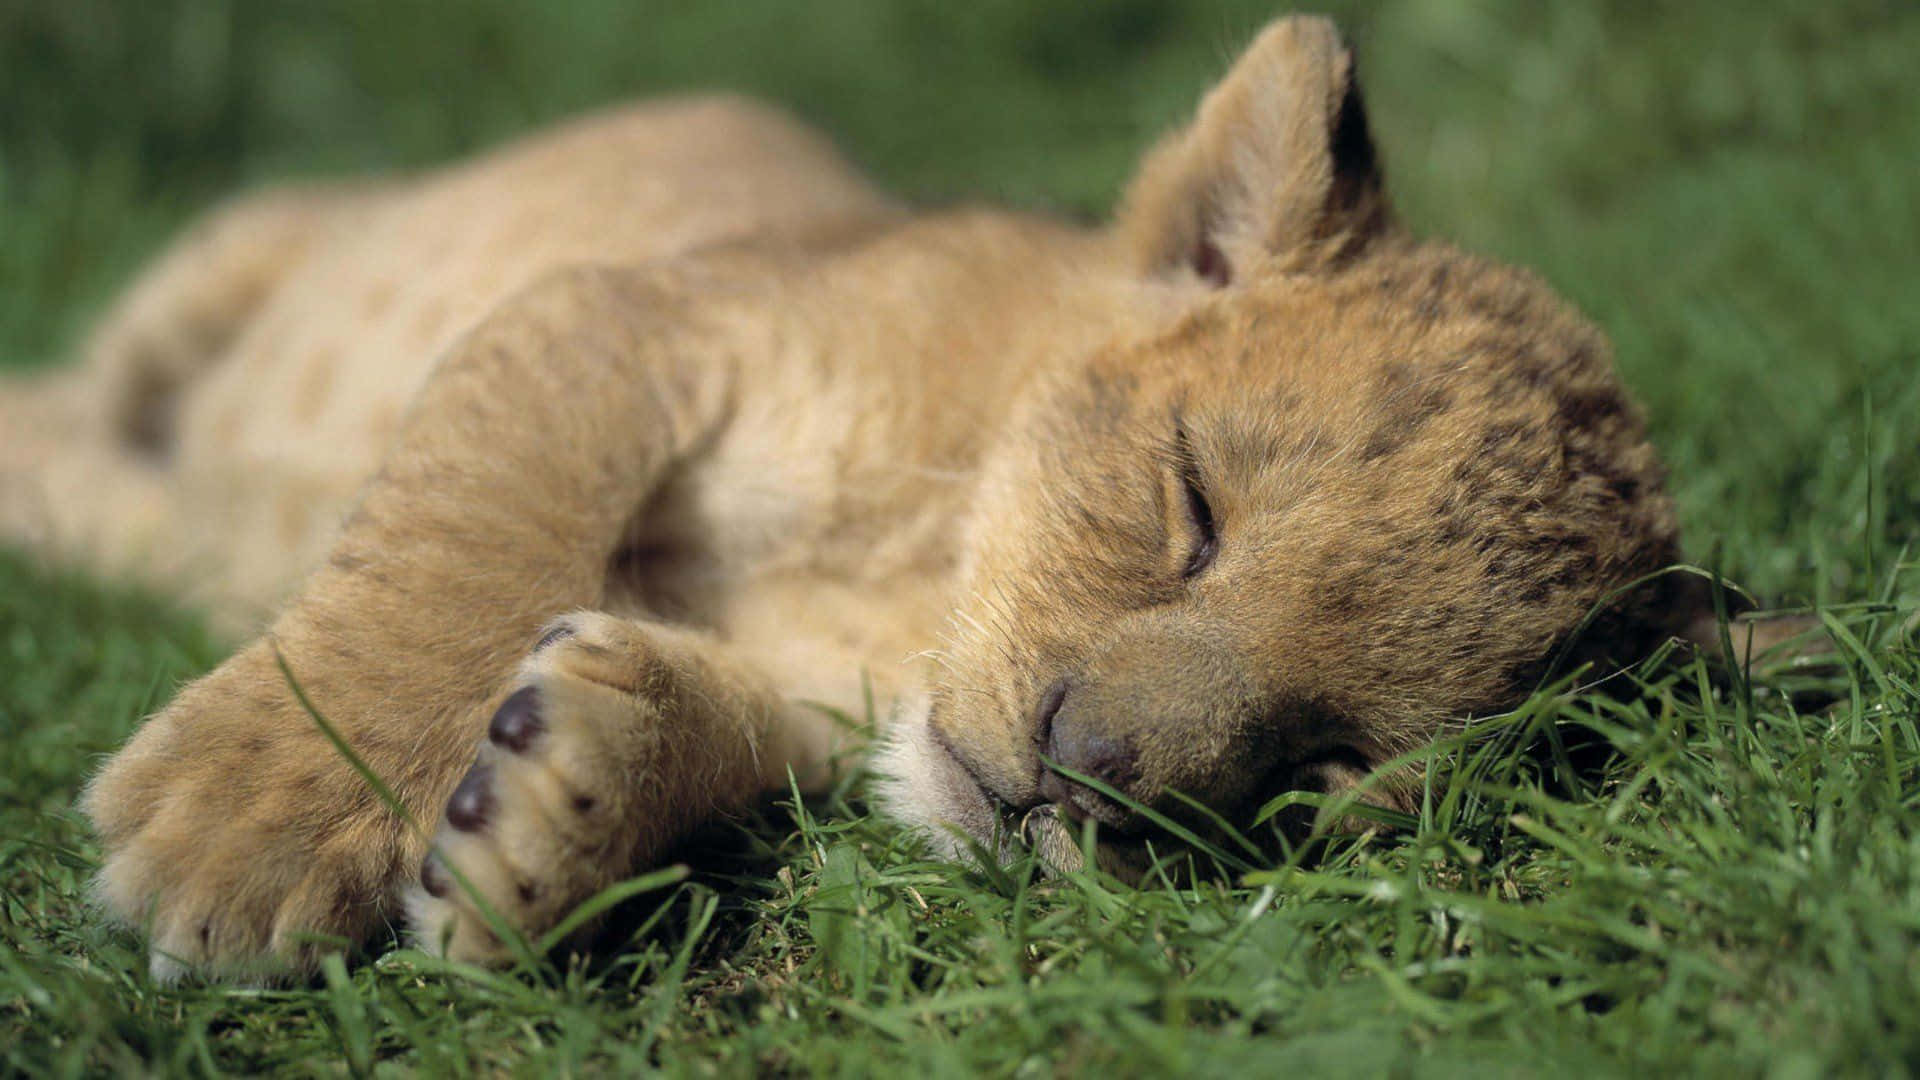 Adorable Baby Animals in Natural Surroundings